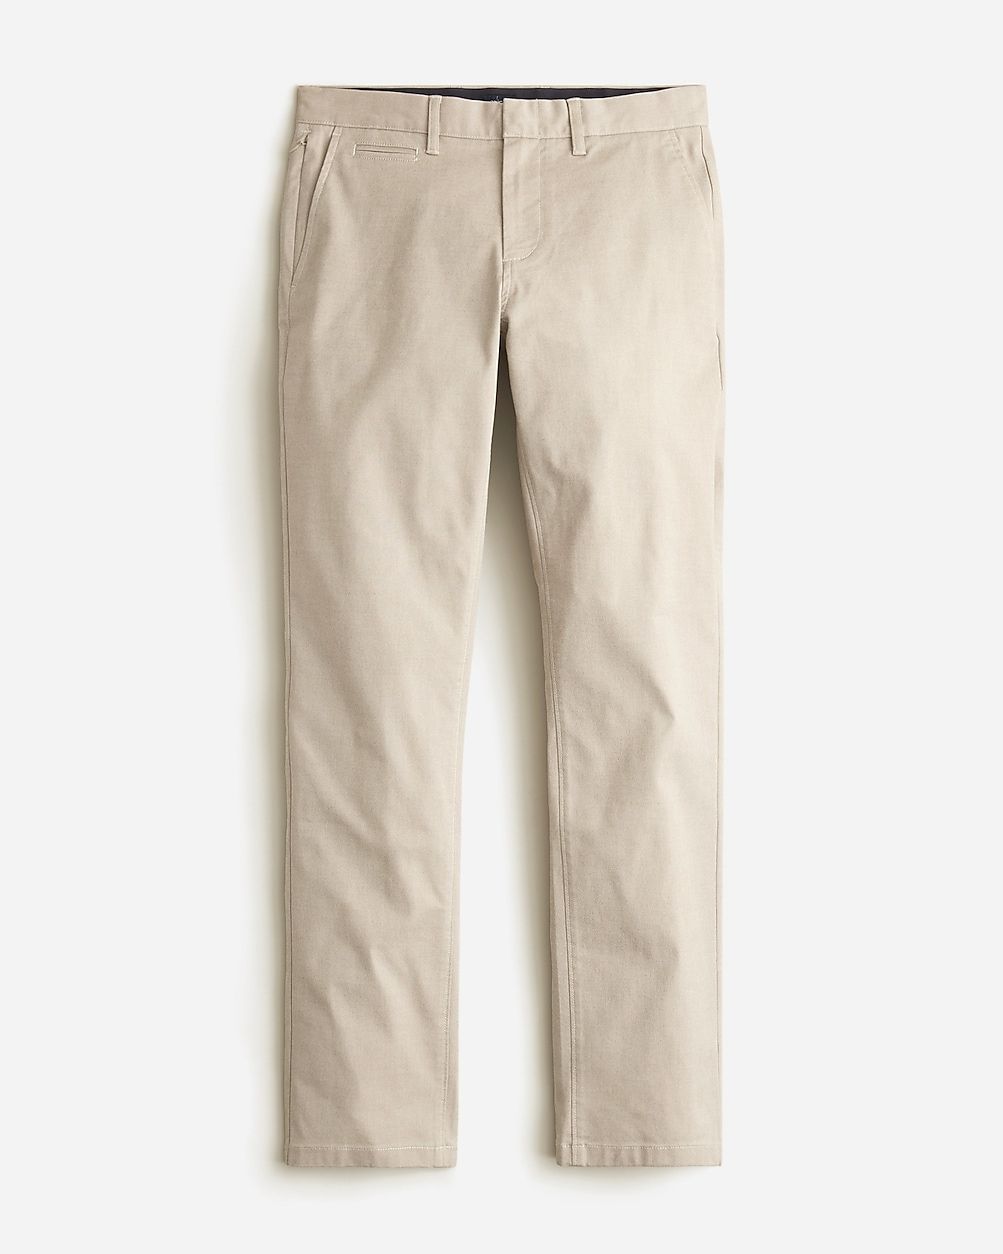 770™ Straight-fit tech oxford pant | J.Crew US